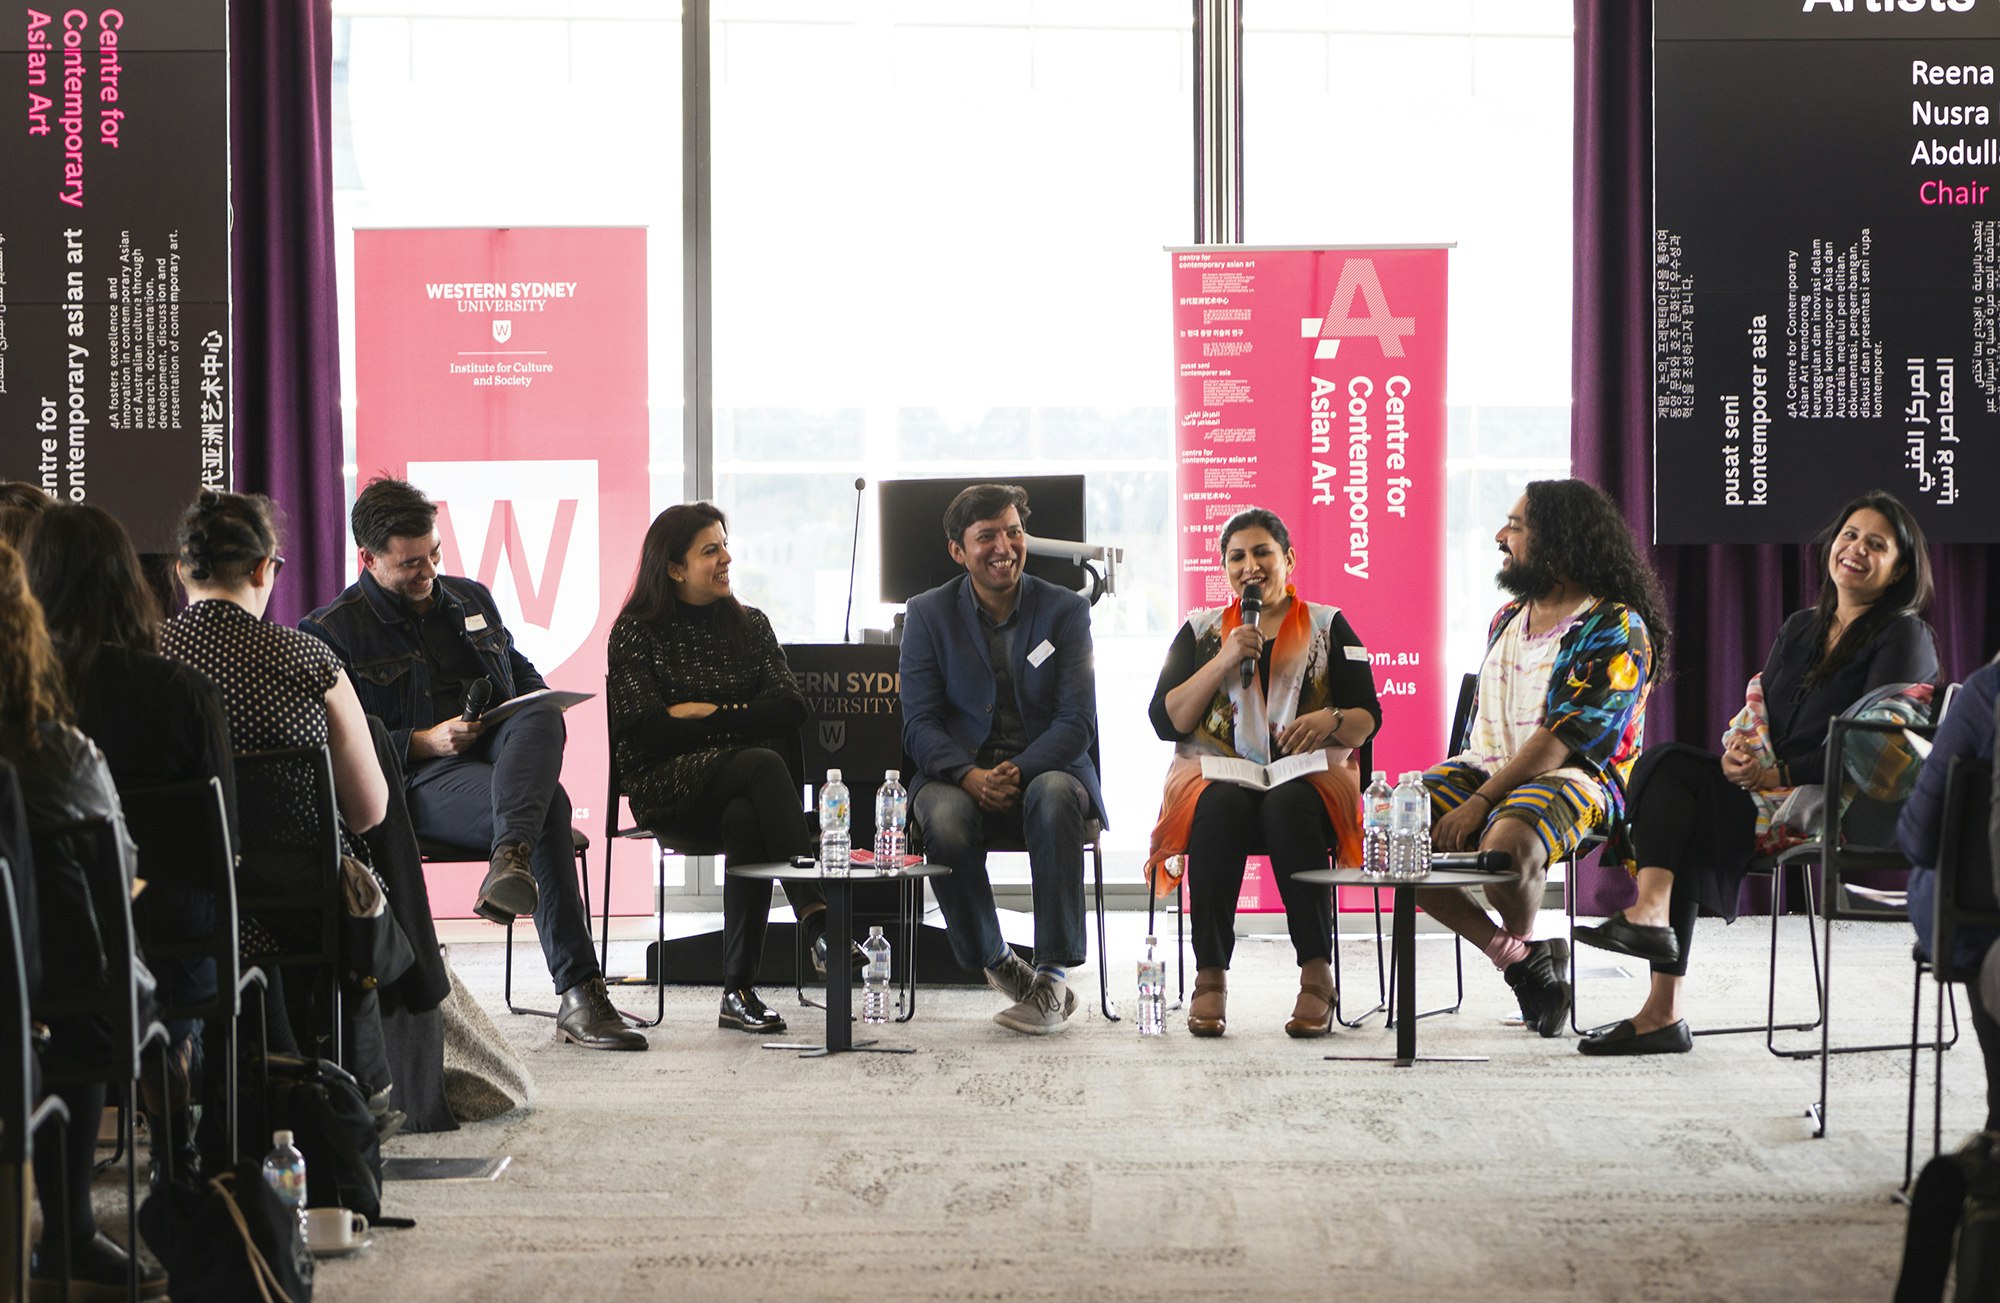 From left to right: Pedro de Almeida, Renna Kallat, Dr Abdullah M. I. Syed, Nusra Latif Qureshi, Ramesh Mario Nithiyendran and Adeela Suleman. When South is North: Contemporary Art and Culture in South Asia and Australia symposium, 16 August 2017, Western Sydney University, Parramatta campus. Produced by 4A Centre for Contemporary Asian Art in association with the Institute for Contemporary Culture and Society, Western Sydney University; photo: Kai Wasikowski.